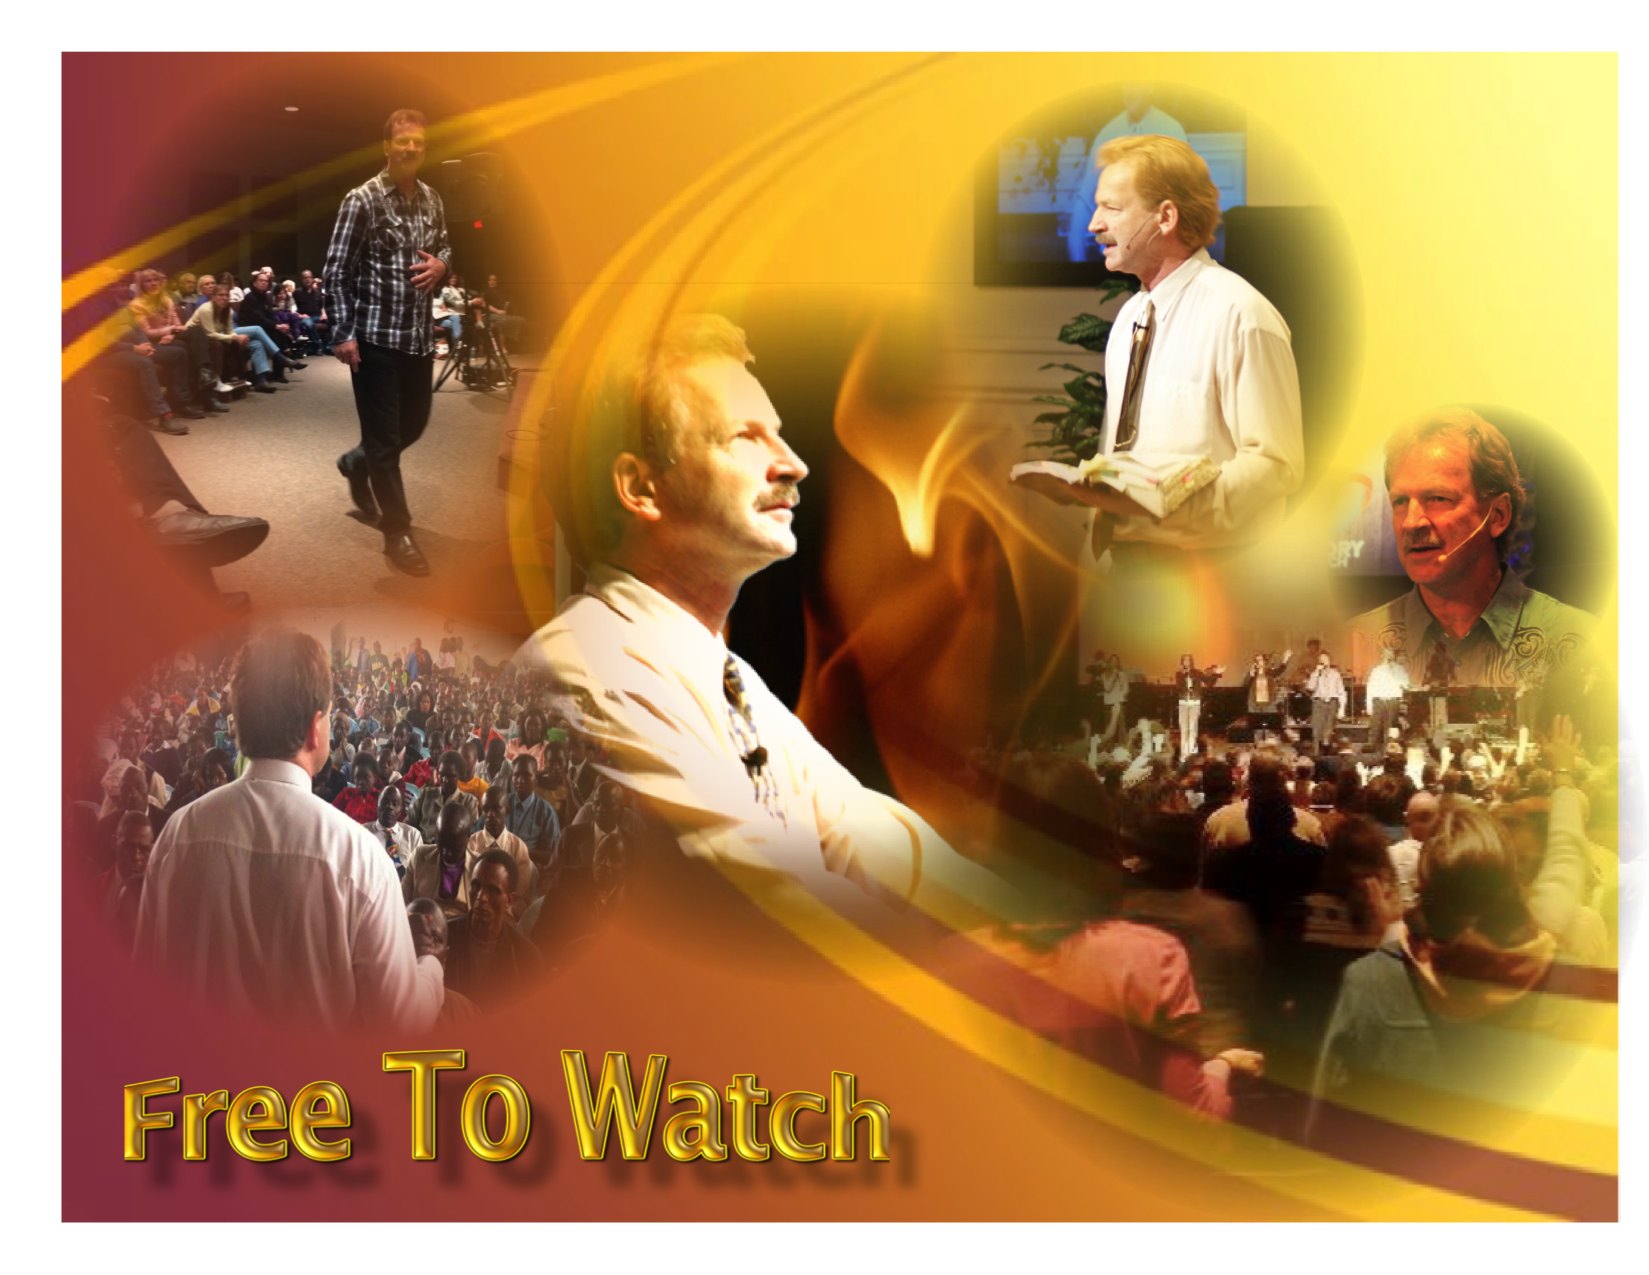 Free To Watch - Page Opener